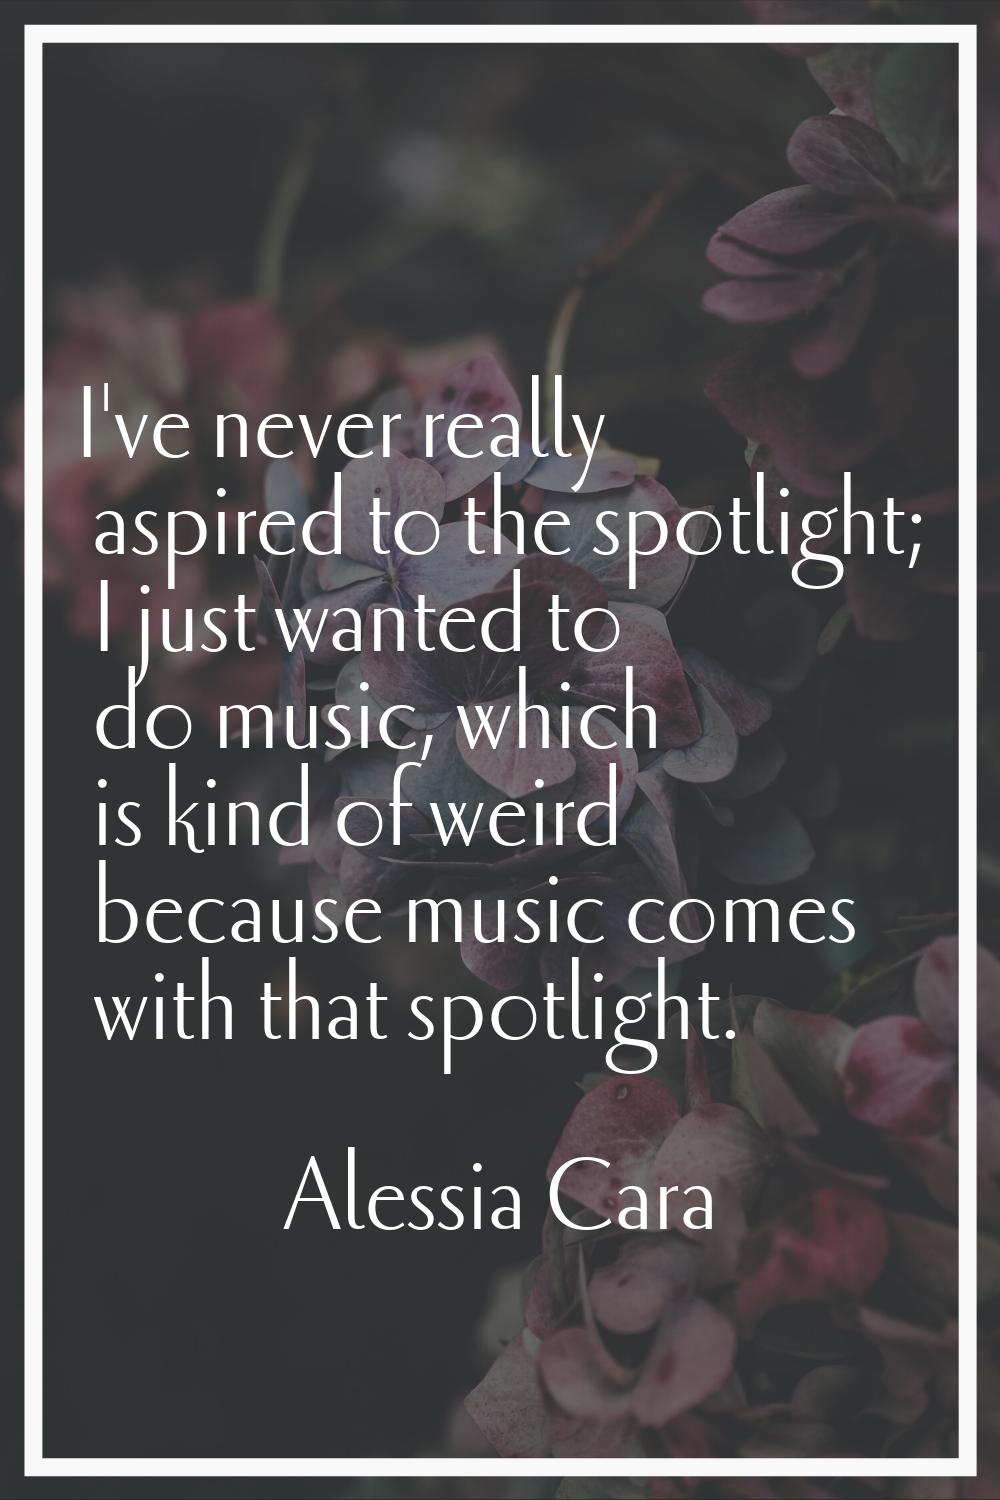 I've never really aspired to the spotlight; I just wanted to do music, which is kind of weird becau